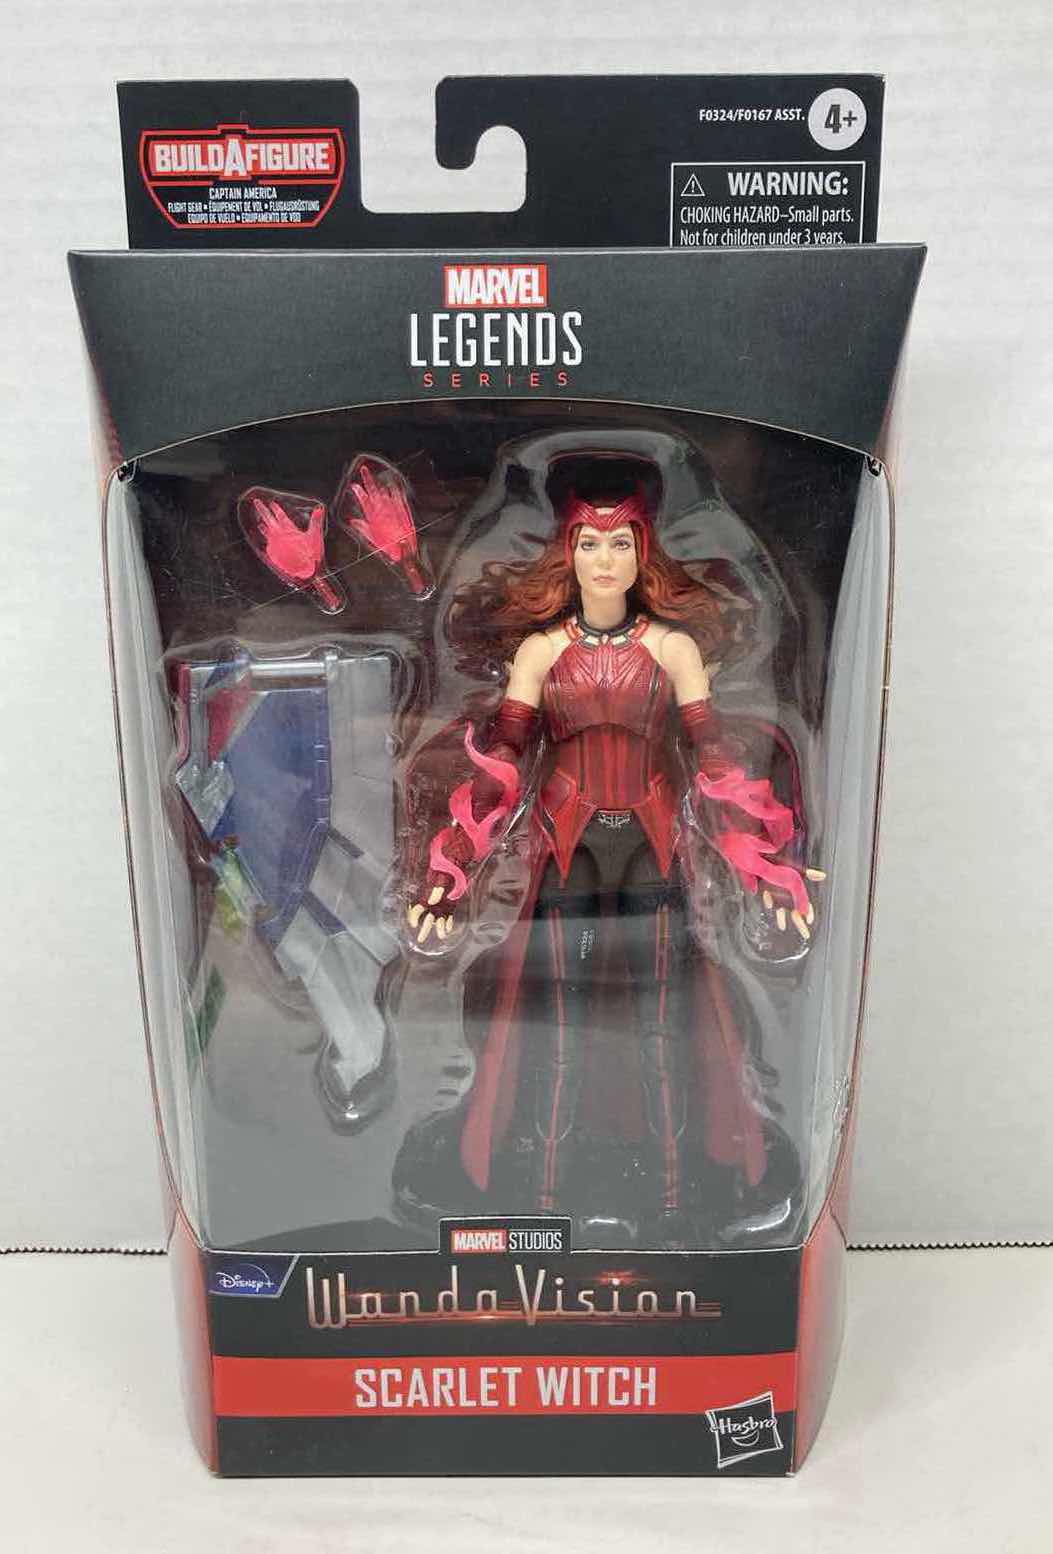 Photo 1 of NEW MARVEL LEGEND SERIES WANDA VISION ACTION FIGURE, SCARLET WITCH